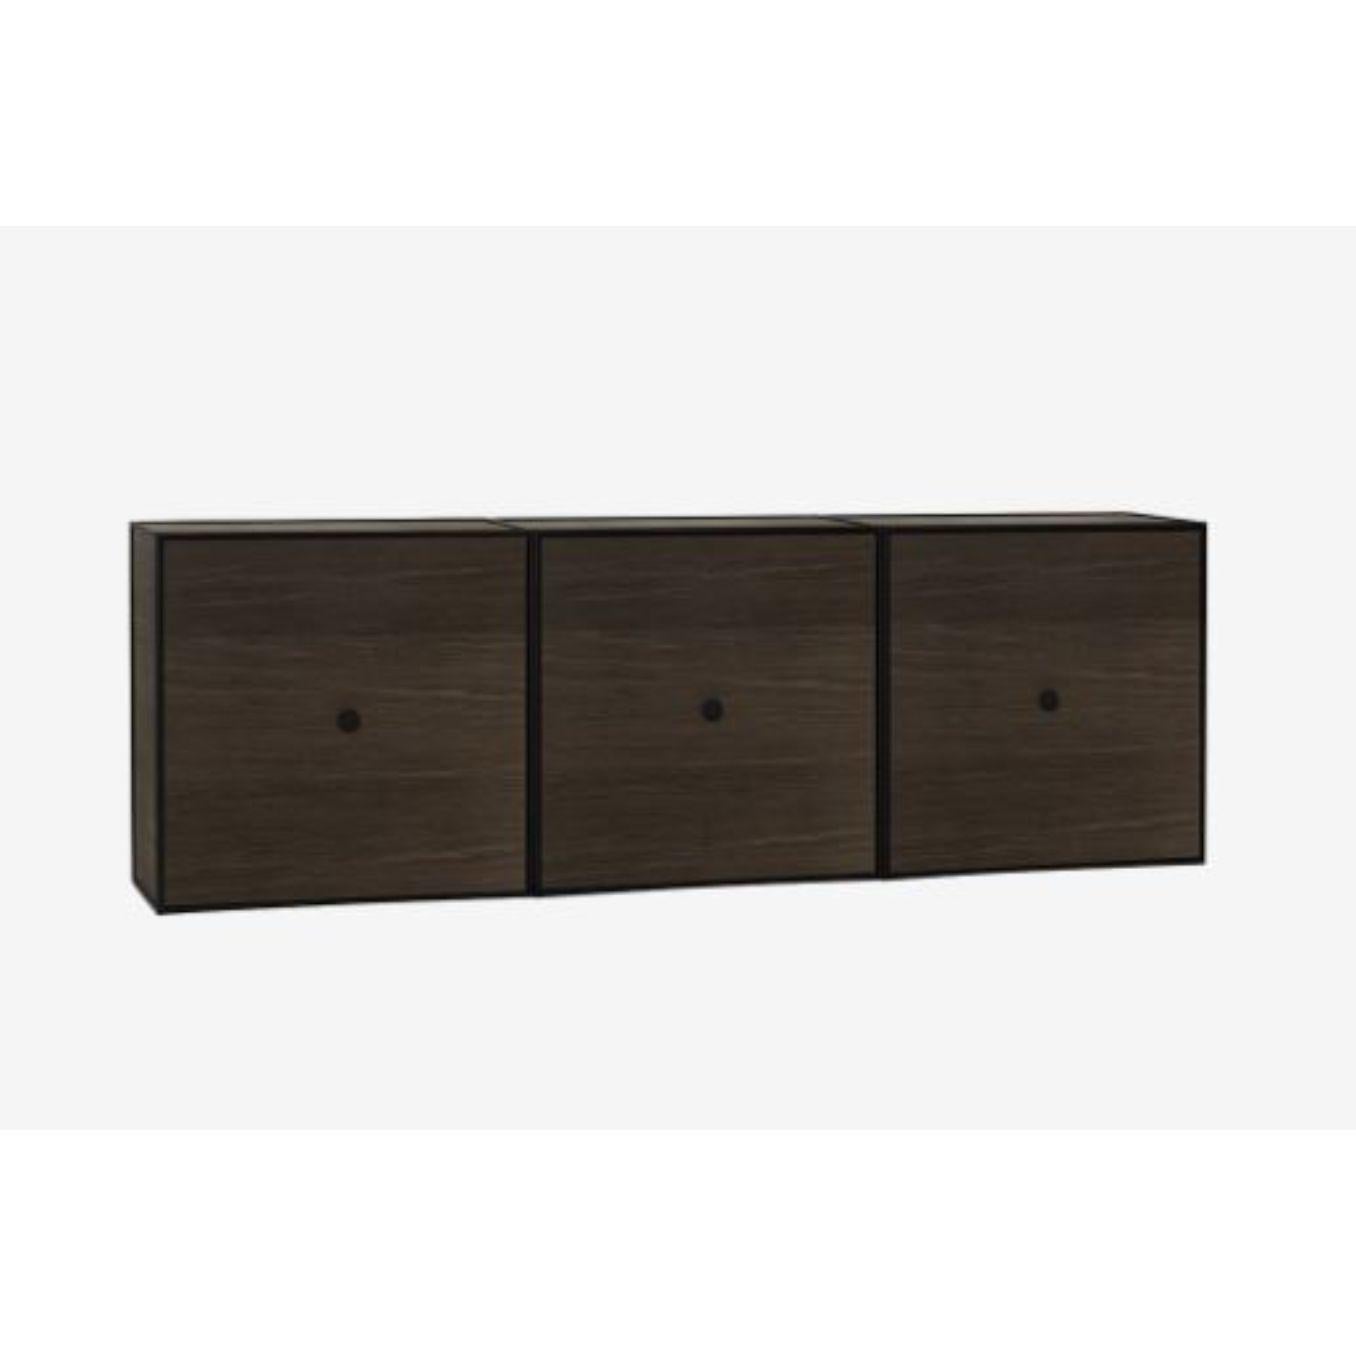 42 Smoked oak frame view box by Lassen
Dimensions: D 126 x W 21 x H 42 cm 
Materials: finér, melamin, melamine, metal, veneer, oak
Also available in different colors and dimensions. 
Weight: 22.80 Kg

By Lassen is a Danish design brand focused